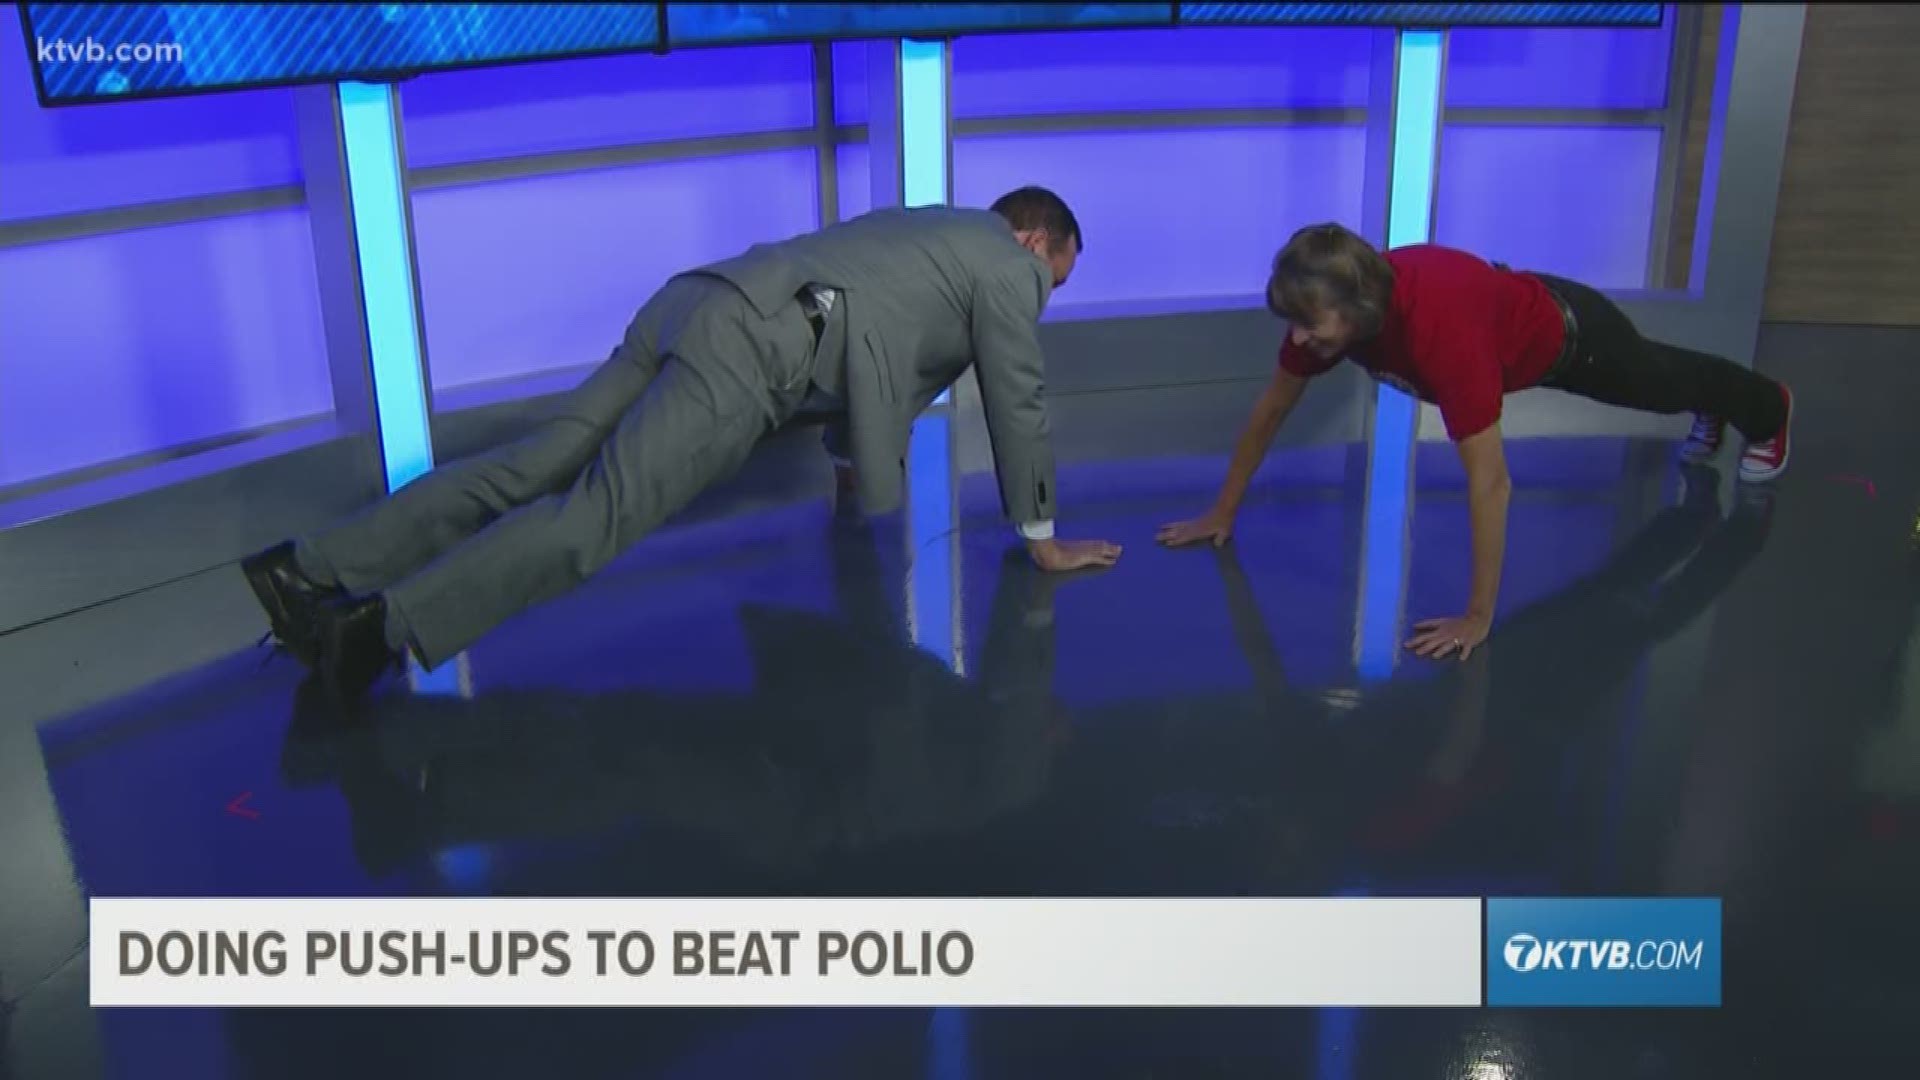 The Man Up Crusade is taking a stand against domestic Violence. A member of the Boise Rotary Sunrise Club is doing push-ups to help eradicate polio around the world.